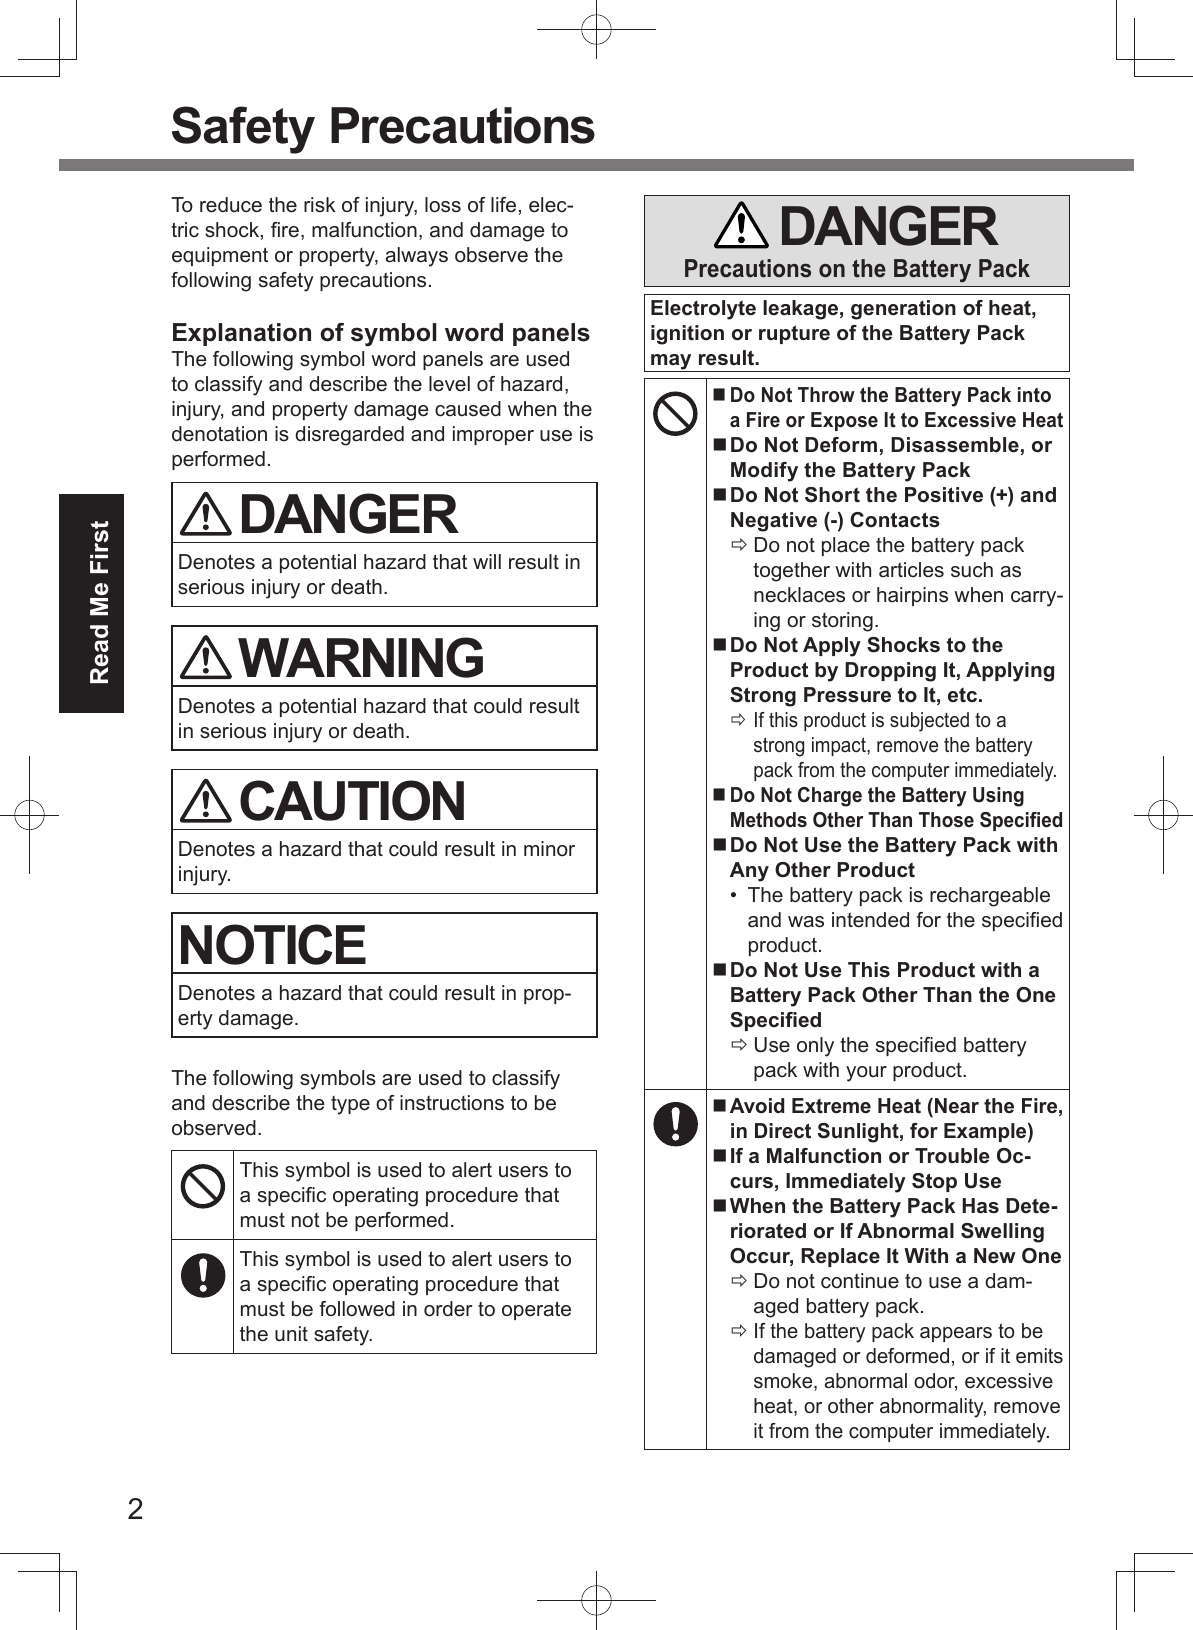 2Read Me First Safety PrecautionsTo reduce the risk of injury, loss of life, elec-tric shock, ﬁ re, malfunction, and damage to equipment or property, always observe the following safety precautions.Explanation of symbol word panelsThe following symbol word panels are used to classify and describe the level of hazard, injury, and property damage caused when the denotation is disregarded and improper use is performed. DANGERDenotes a potential hazard that will result in serious injury or death. WARNINGDenotes a potential hazard that could result in serious injury or death. CAUTIONDenotes a hazard that could result in minor injury.NOTICEDenotes a hazard that could result in prop-erty damage.The following symbols are used to classify and describe the type of instructions to be observed.This symbol is used to alert users to a speciﬁ c operating procedure that must not be performed.This symbol is used to alert users to a speciﬁ c operating procedure that must be followed in order to operate the unit safety. DANGERPrecautions on the Battery PackElectrolyte leakage, generation of heat, ignition or rupture of the Battery Pack may result. Do Not Throw the Battery Pack into a Fire or Expose It to Excessive Heat Do Not Deform, Disassemble, or Modify the Battery Pack Do Not Short the Positive (+) and Negative (-) Contacts Do not place the battery pack together with articles such as necklaces or hairpins when carry-ing or storing. Do Not Apply Shocks to the Product by Dropping It, Applying Strong Pressure to It, etc. If this product is subjected to a strong impact, remove the battery pack from the computer immediately. Do Not Charge the Battery Using Methods Other Than Those Speciﬁ ed Do Not Use the Battery Pack with Any Other Product•  The battery pack is rechargeable and was intended for the speciﬁ ed product. Do Not Use This Product with a Battery Pack Other Than the One Speciﬁ ed Use only the speciﬁ ed battery pack with your product. Avoid Extreme Heat (Near the Fire, in Direct Sunlight, for Example) If a Malfunction or Trouble Oc-curs, Immediately Stop Use When the Battery Pack Has Dete-riorated or If Abnormal Swelling Occur, Replace It With a New One Do not continue to use a dam-aged battery pack. If the battery pack appears to be damaged or deformed, or if it emits smoke, abnormal odor, excessive heat, or other abnormality, remove it from the computer immediately.